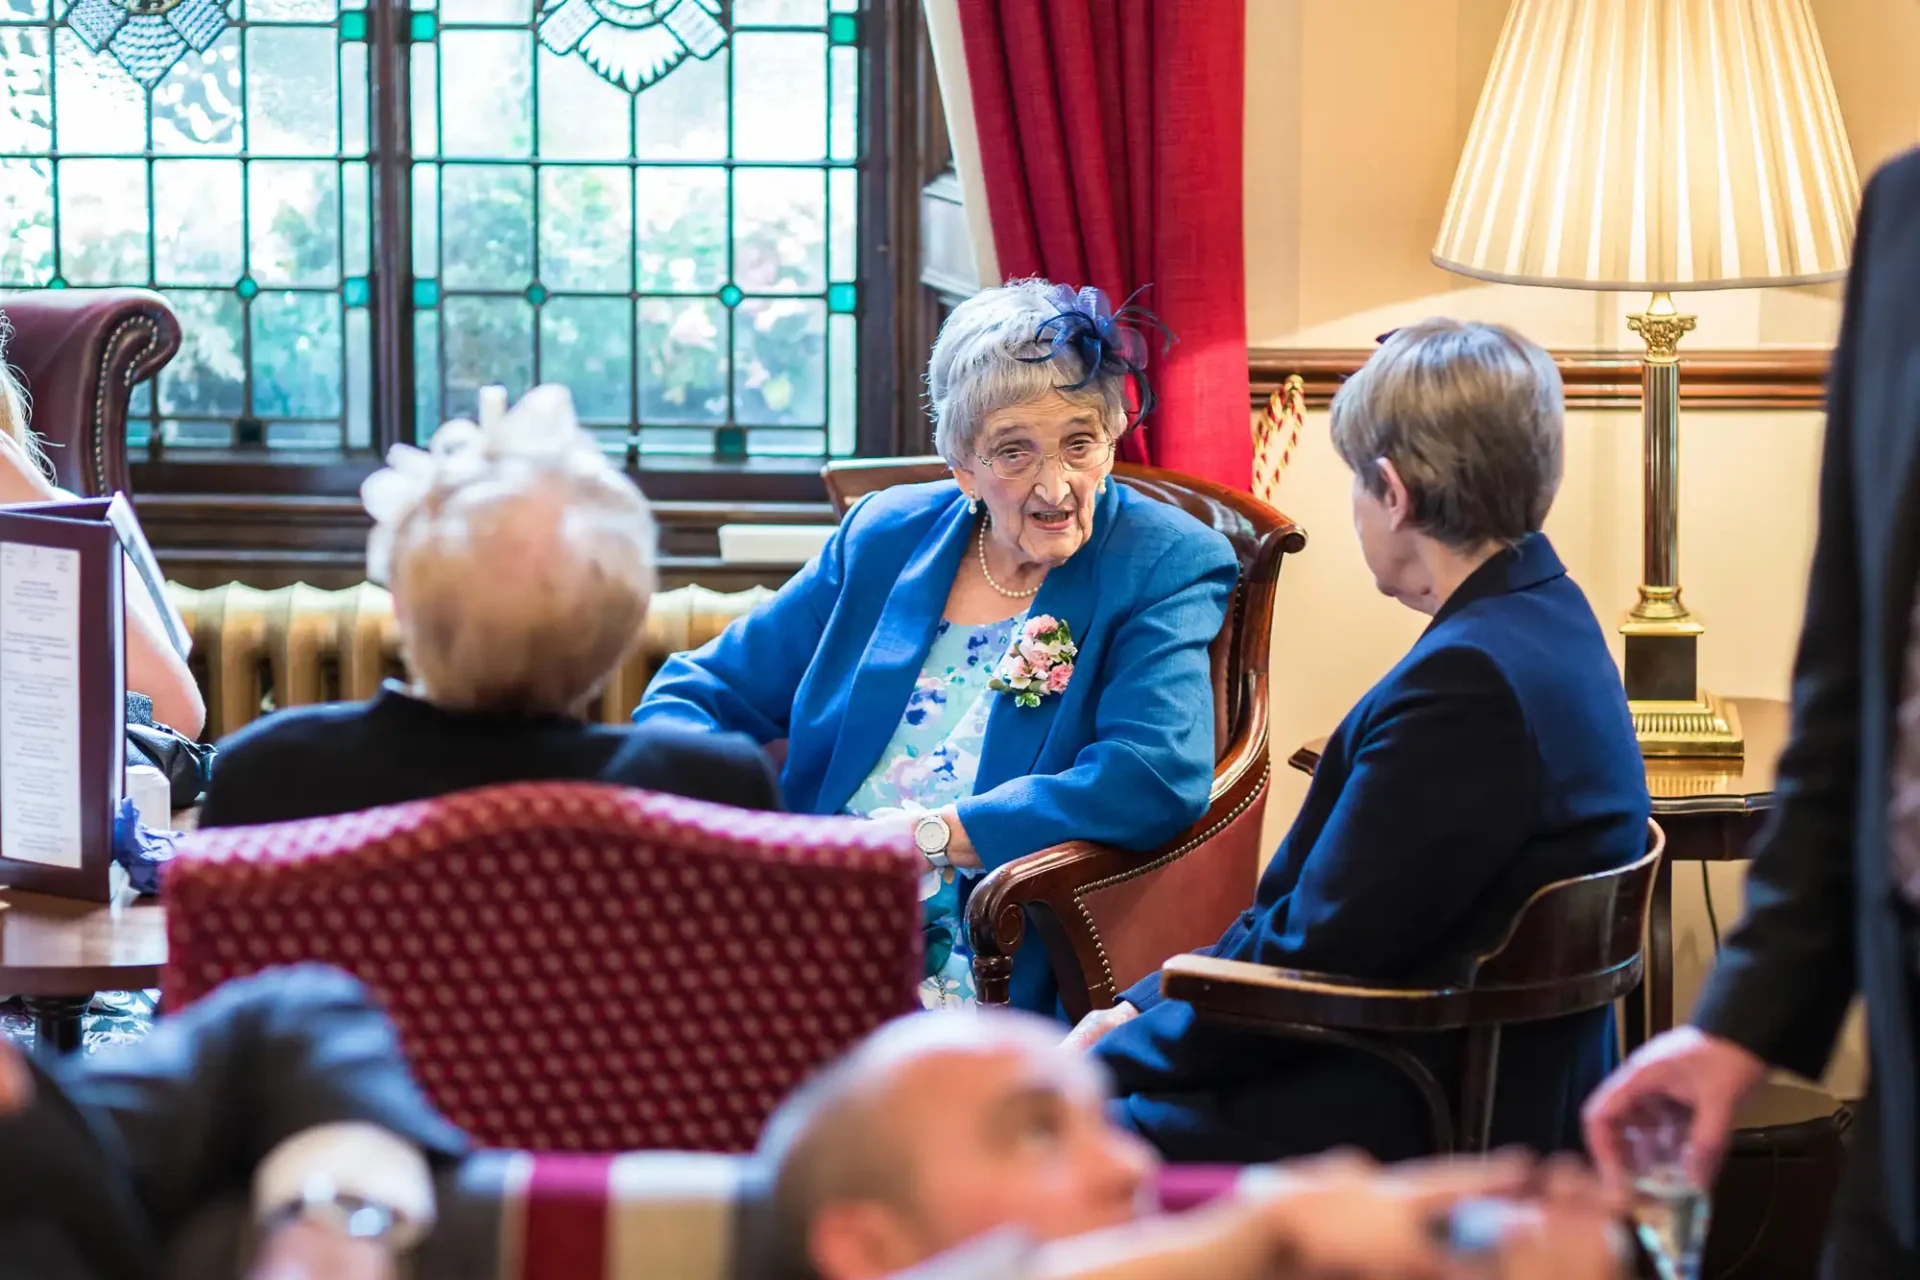 Elderly woman in blue jacket and floral corsage talking to a man in a suit at a social gathering in a room with classic decor.